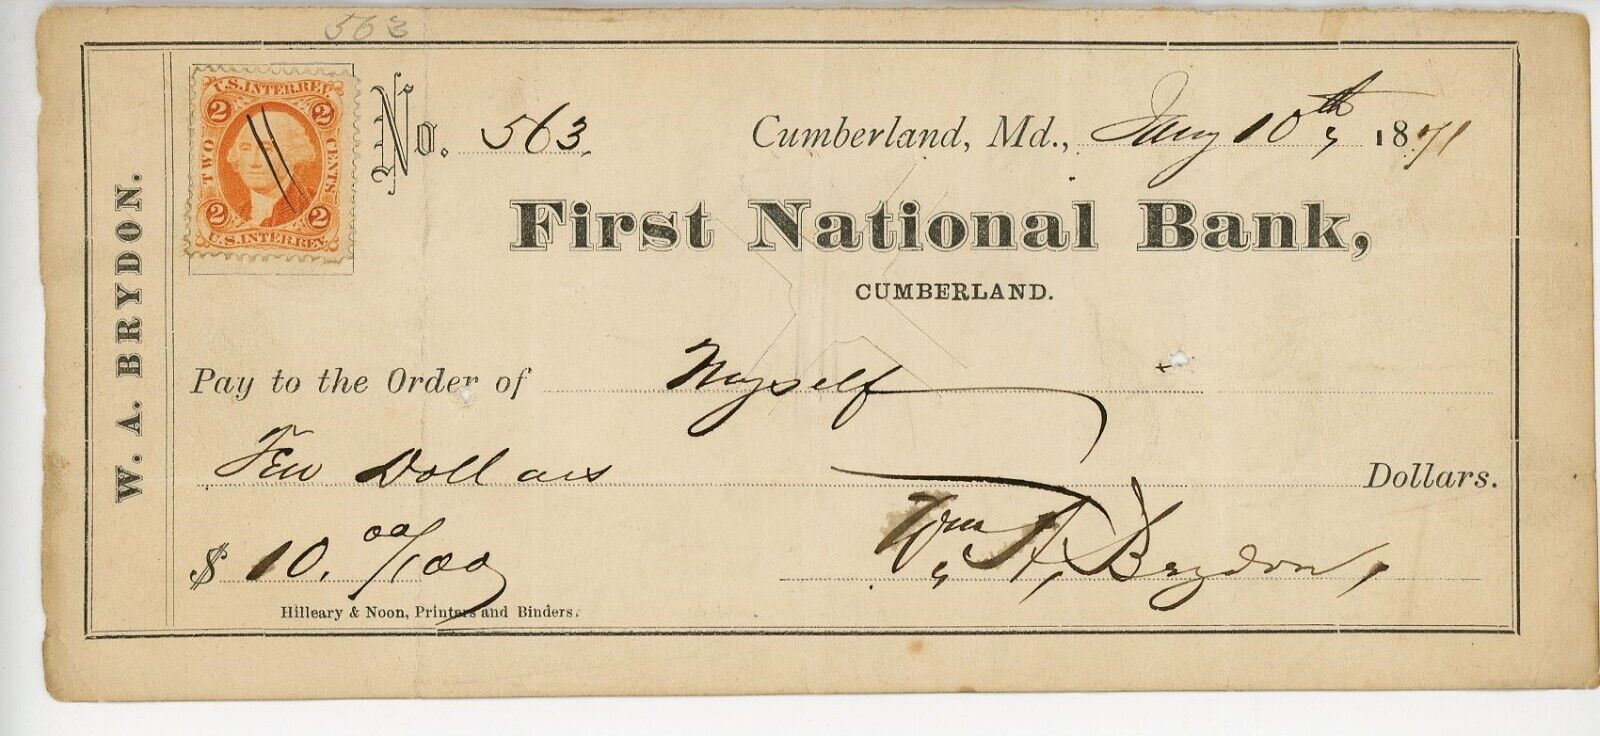 1871 Cancelled Check WA Brydon First National Bank of Cumberland MD IRS Stamp